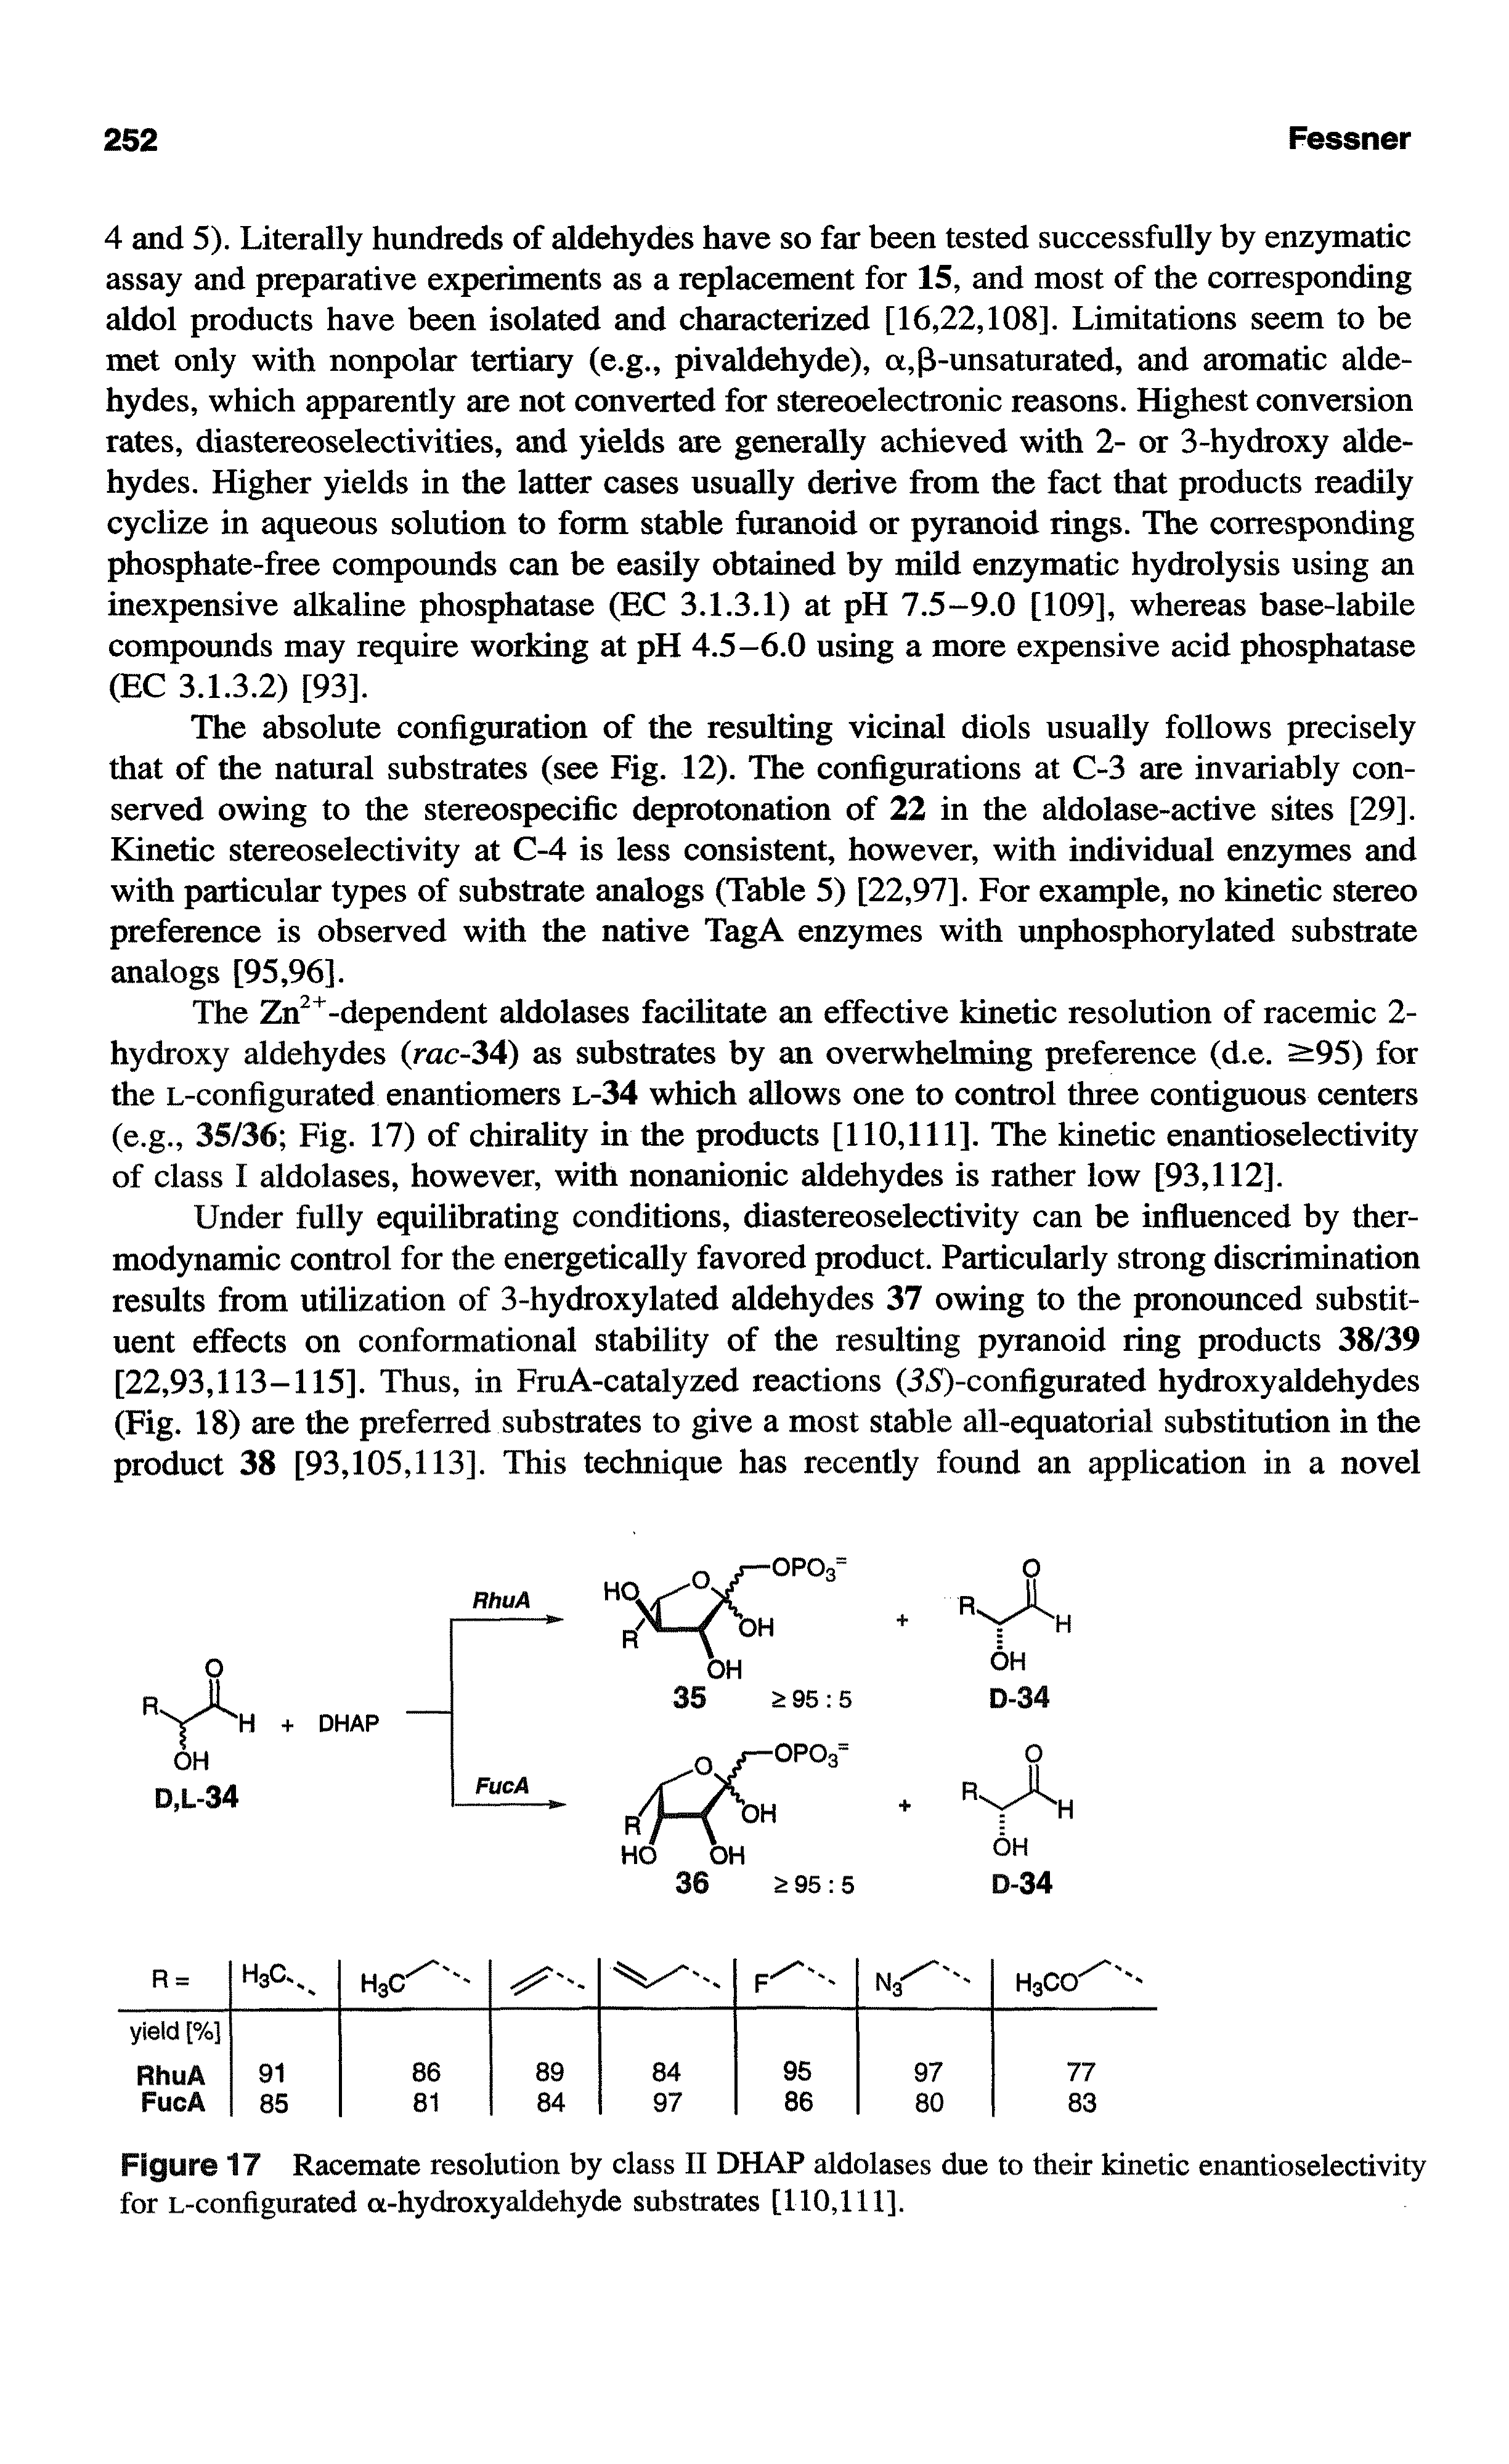 Figure 17 Racemate resolution by class II DHAP aldolases due to their kinetic enantioselectivity for L-configurated a-hydroxyaldehyde substrates [110,111].